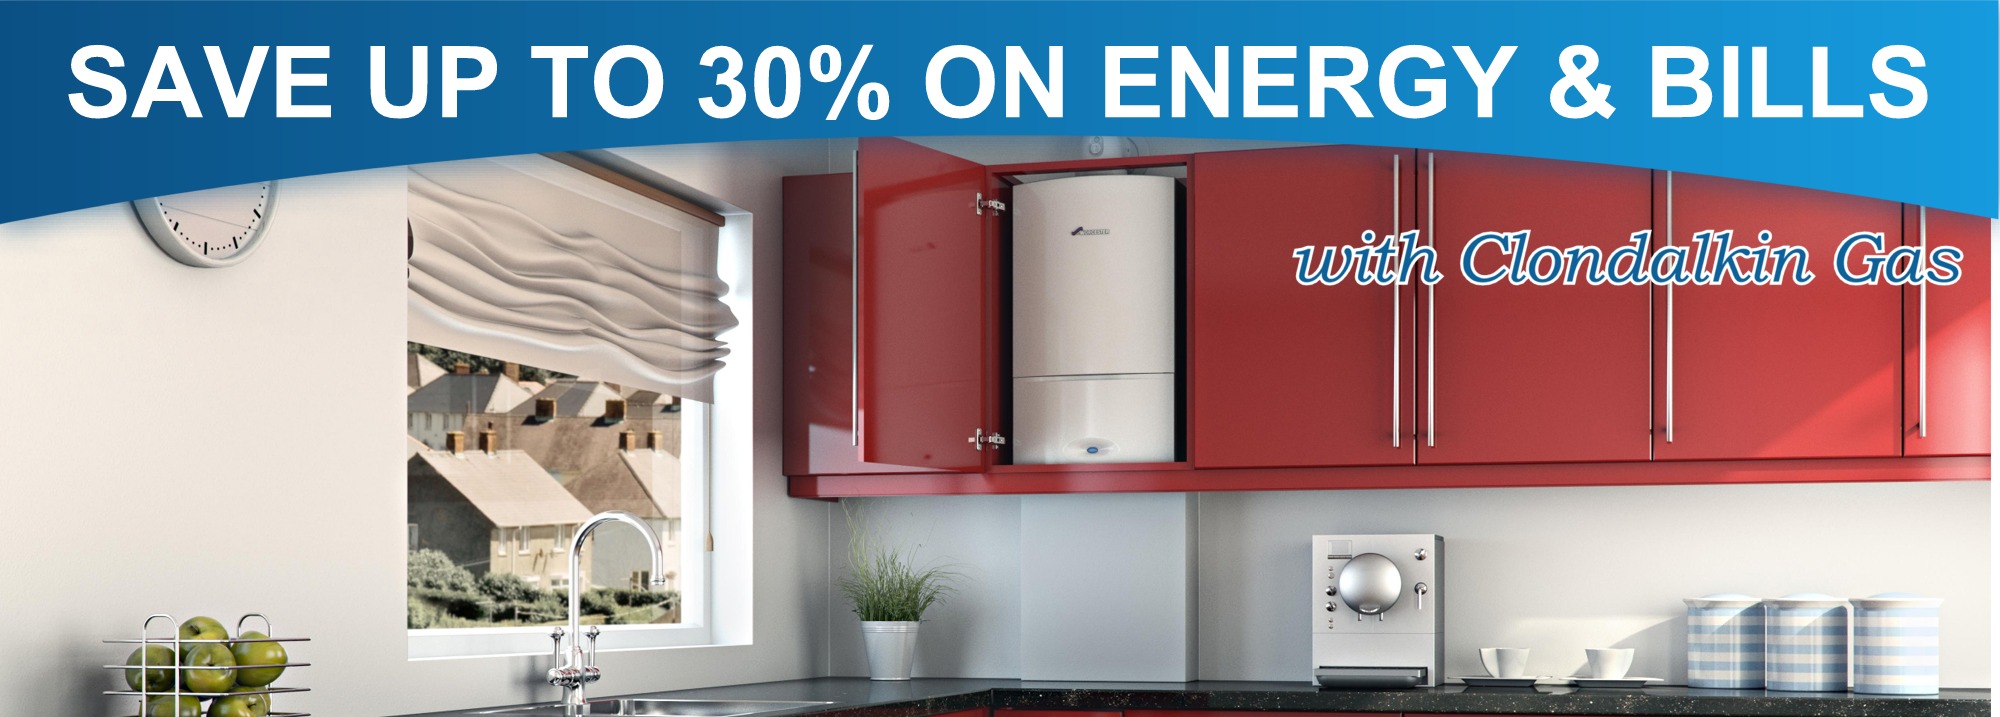 Worcester Bosch High Efficiency Boilers, Which Best Buy for 8 years running. Installed with a ten-year Guarantee by Clondalkin Gas, Dublin, Ireland